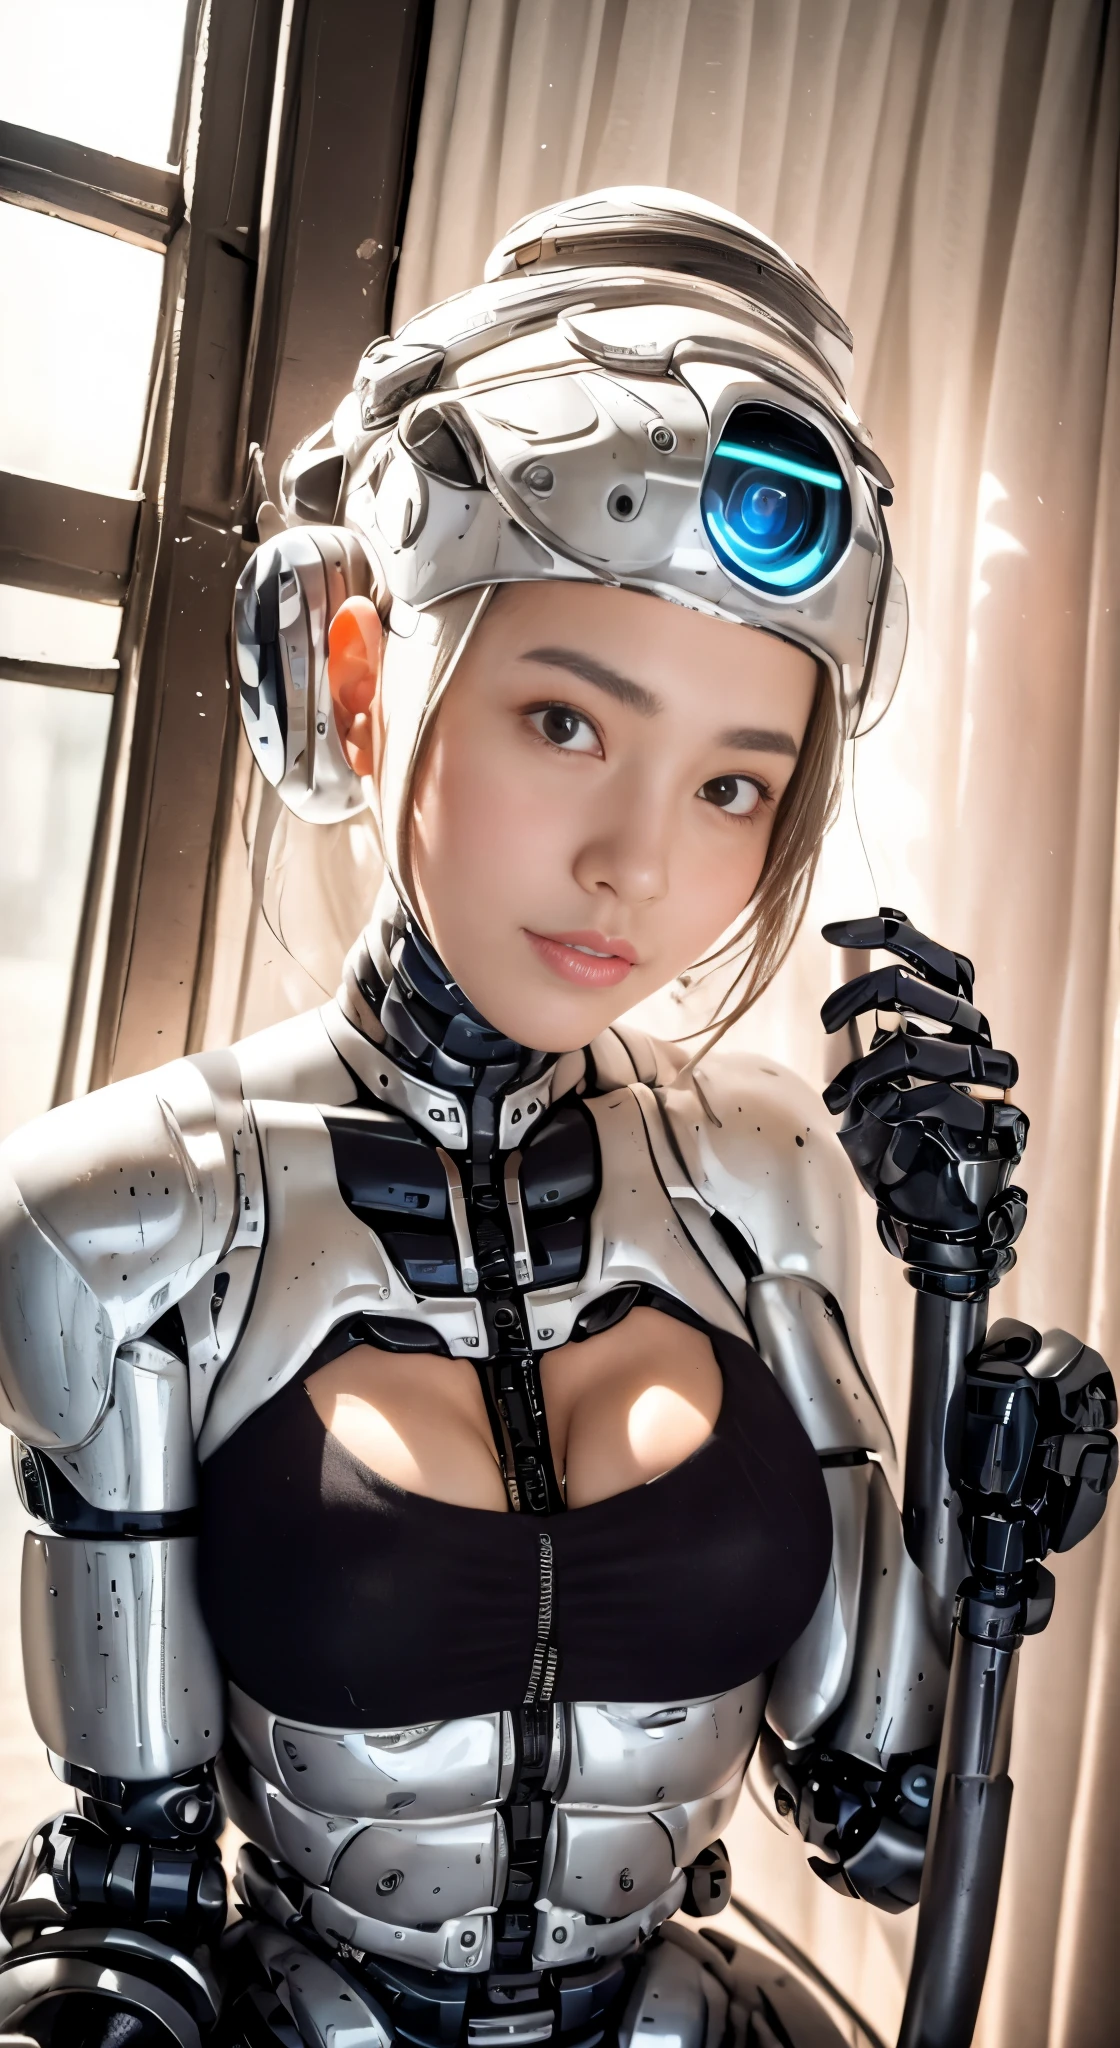 There is a woman in robot suit posing next to ancient building, beautiful white girl half-cyborg, cute cyborg girl, beautiful girl cyborg, perfect robot girl, cyborg girl, young cyborg lady, beautiful female robot, beautiful robot woman, cyborg-girl, perfect cyborg female, porcelain cyborg, female robot, beautiful cyborg image